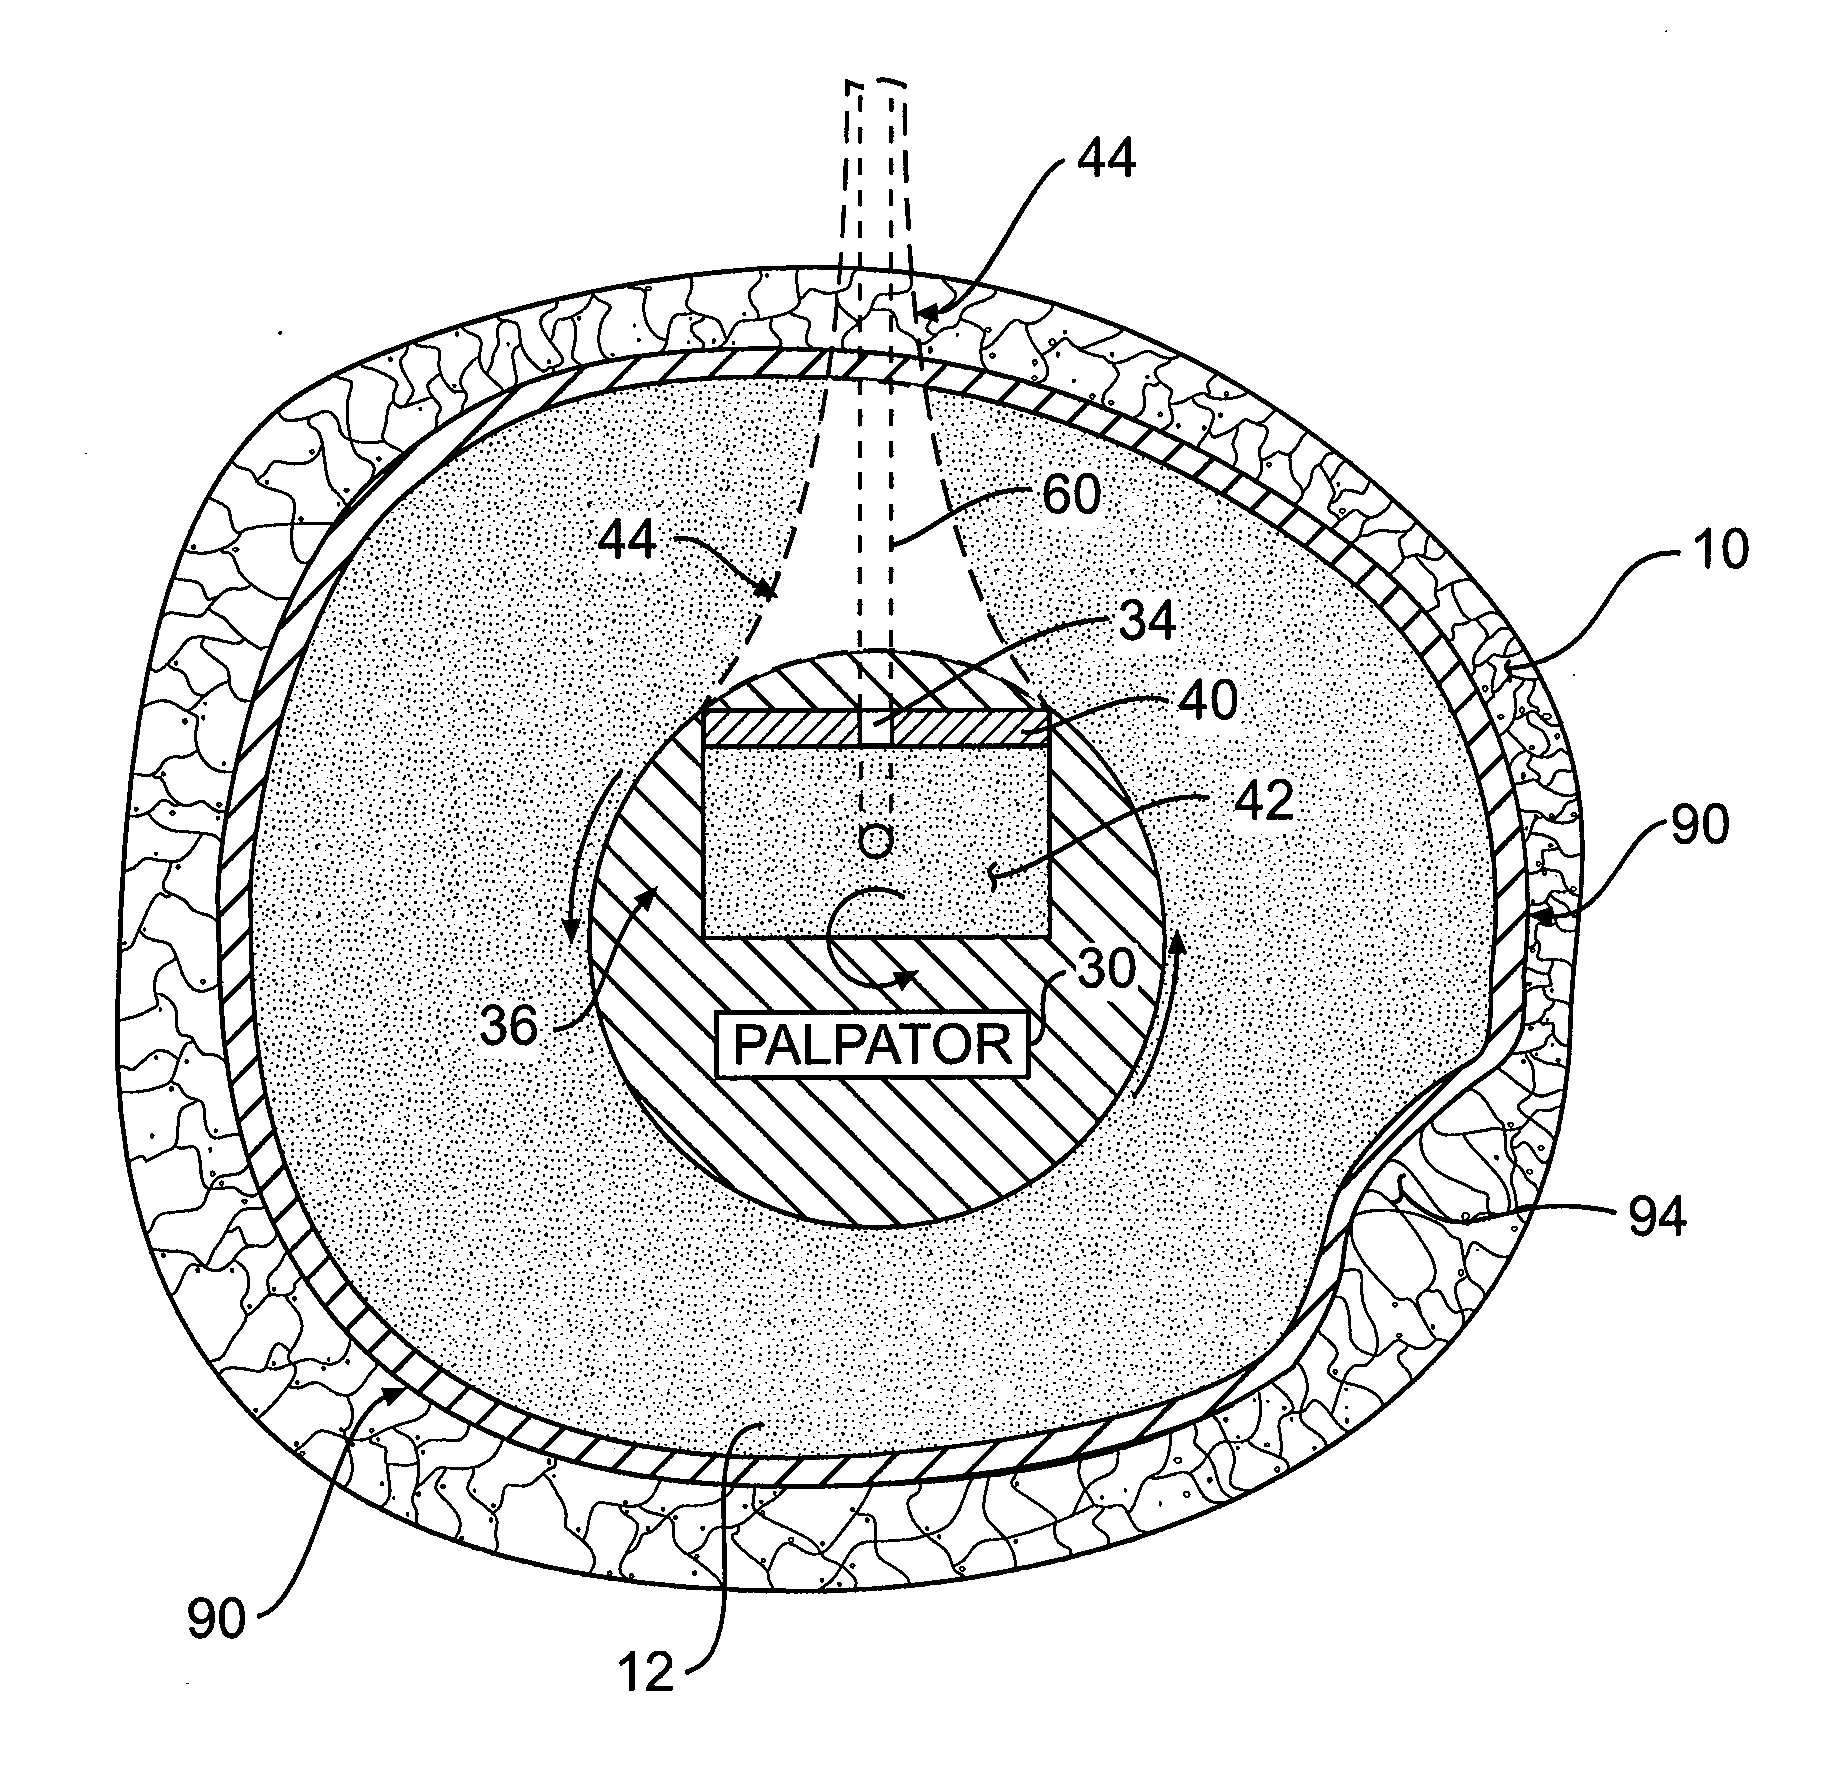 Optical coherence tomography catheter for elastographic property mapping of lumens utilizing micropalpation